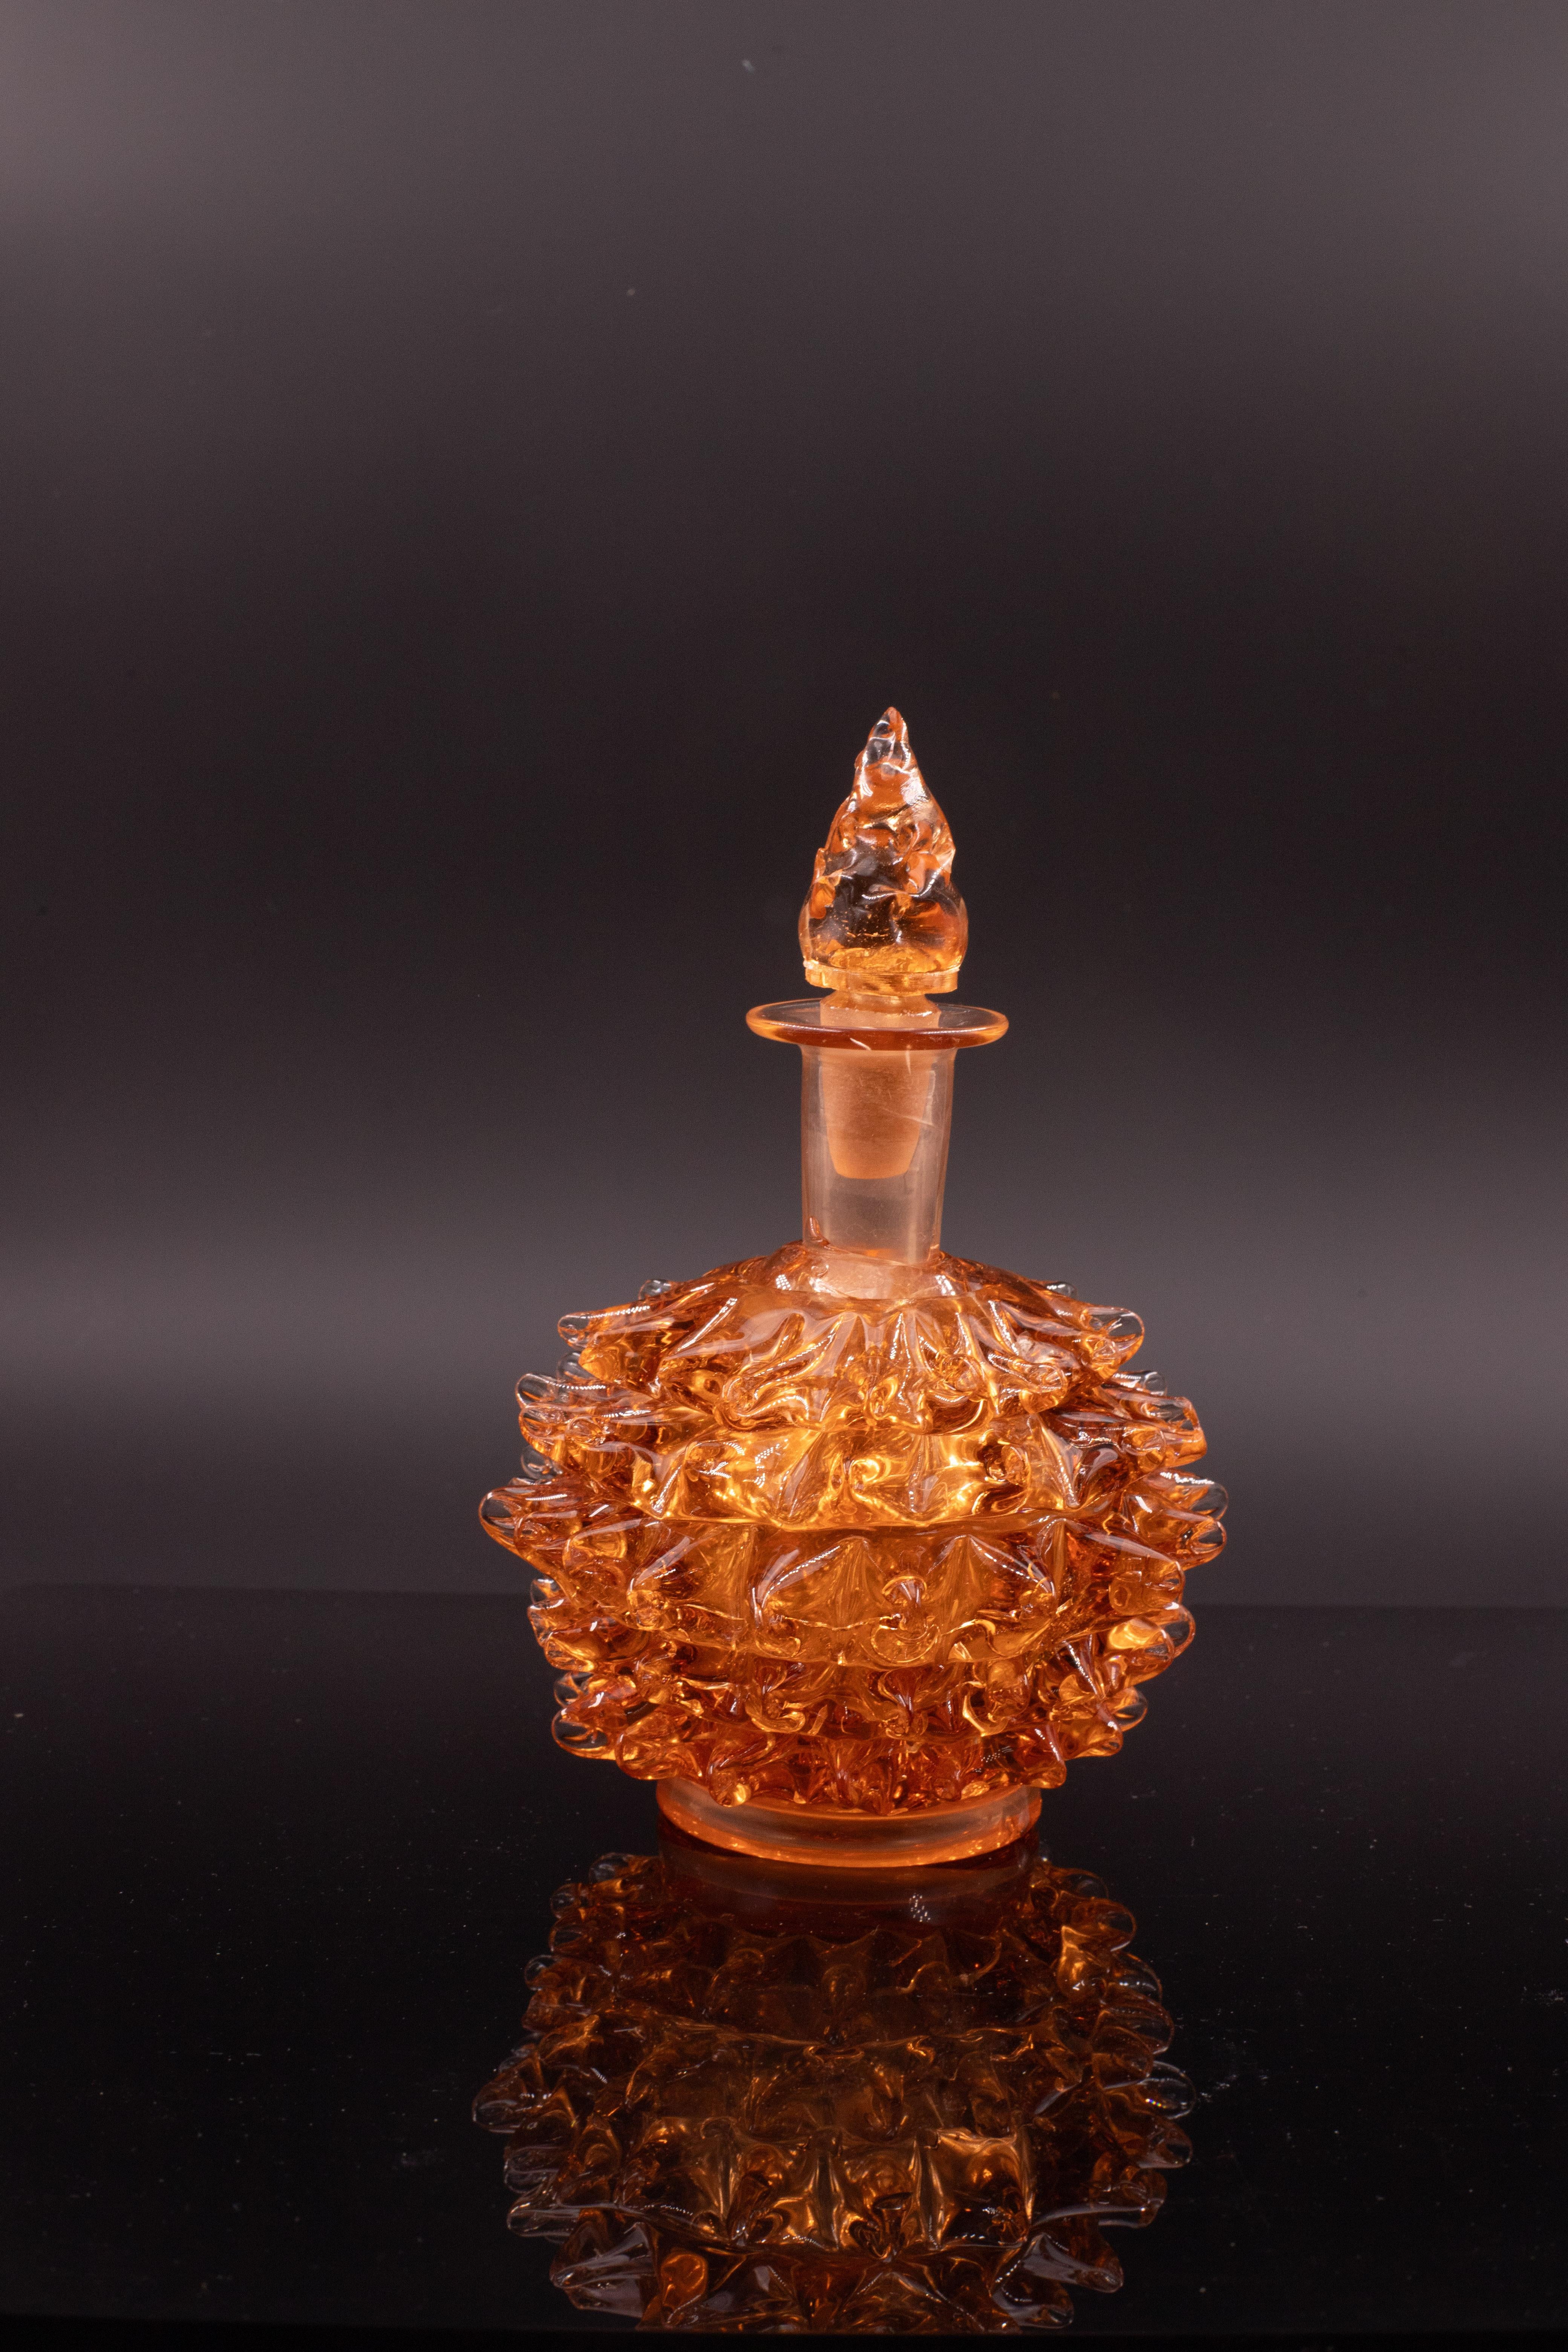 Rare Set of 3 Amber Rostrato Murano Glass Vases by Barovier & Toso, 1940s For Sale 4